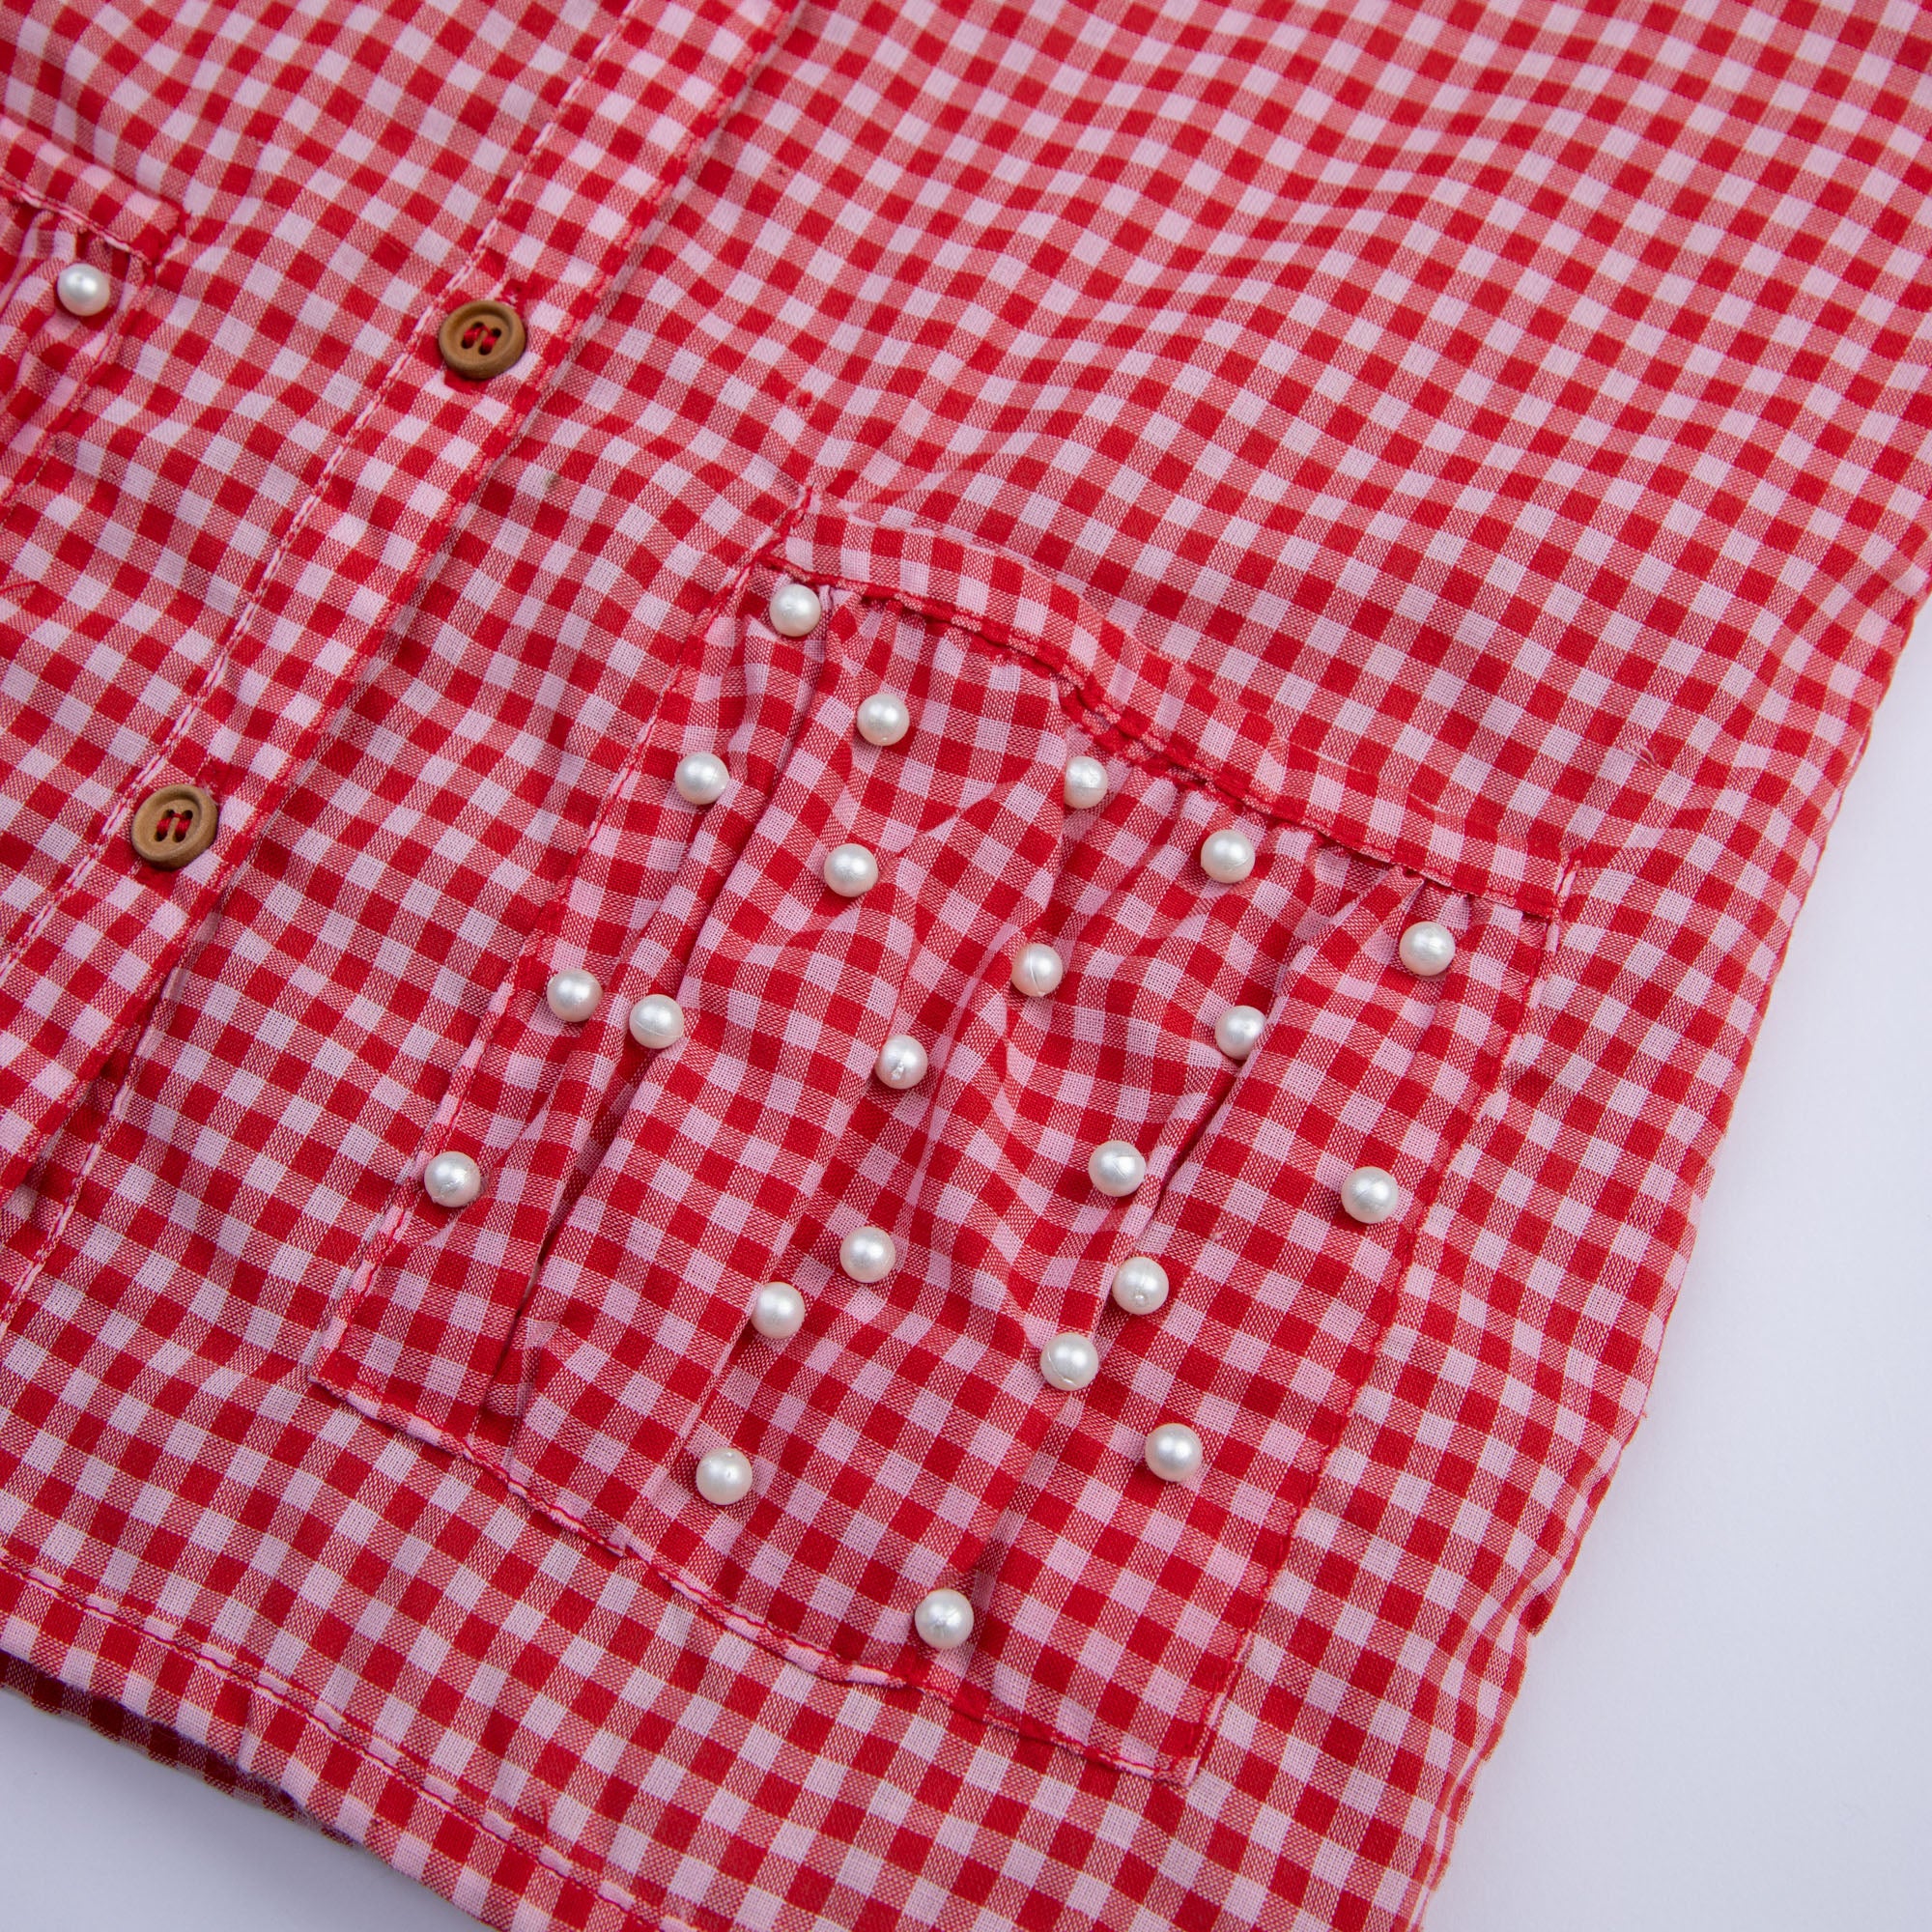 Red Checkered Top with Embellishment